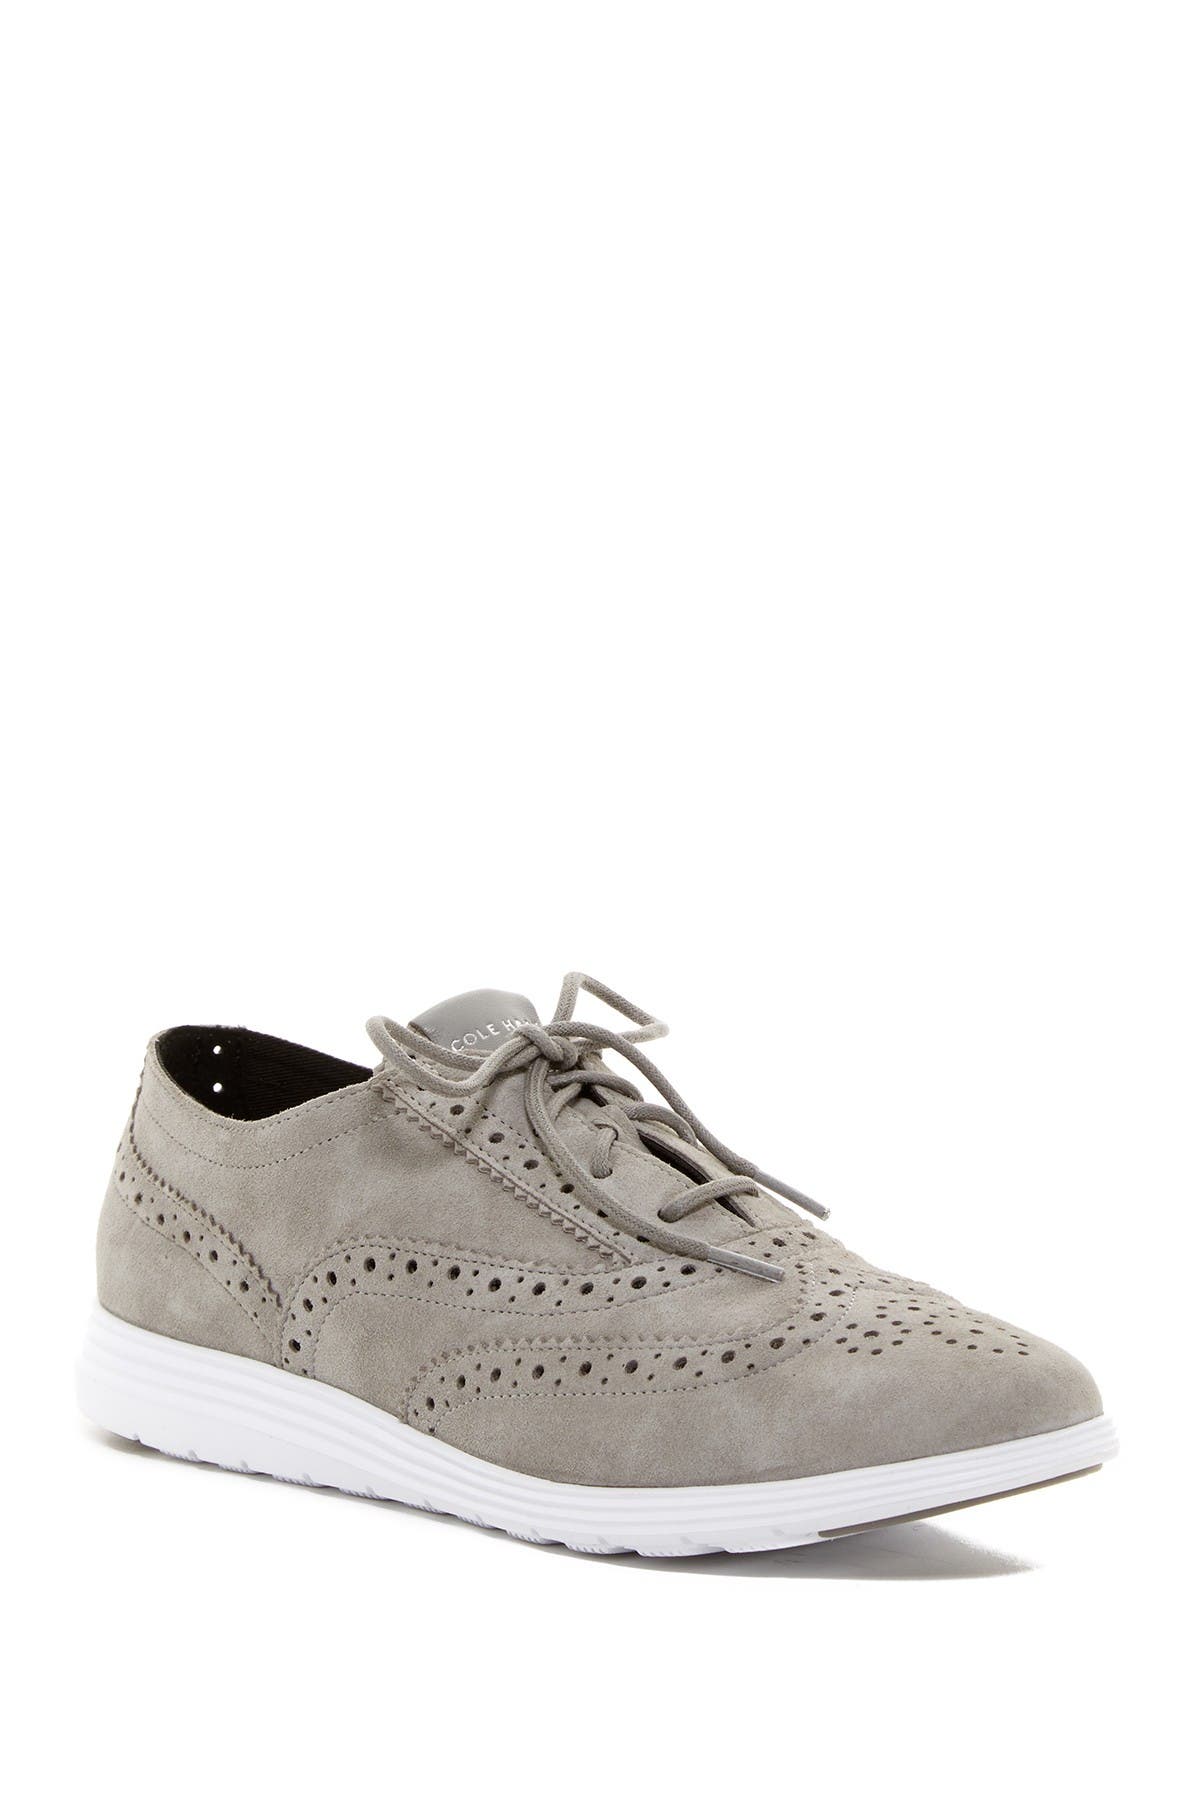 Cole Haan | Grand Tour Suede Oxford 